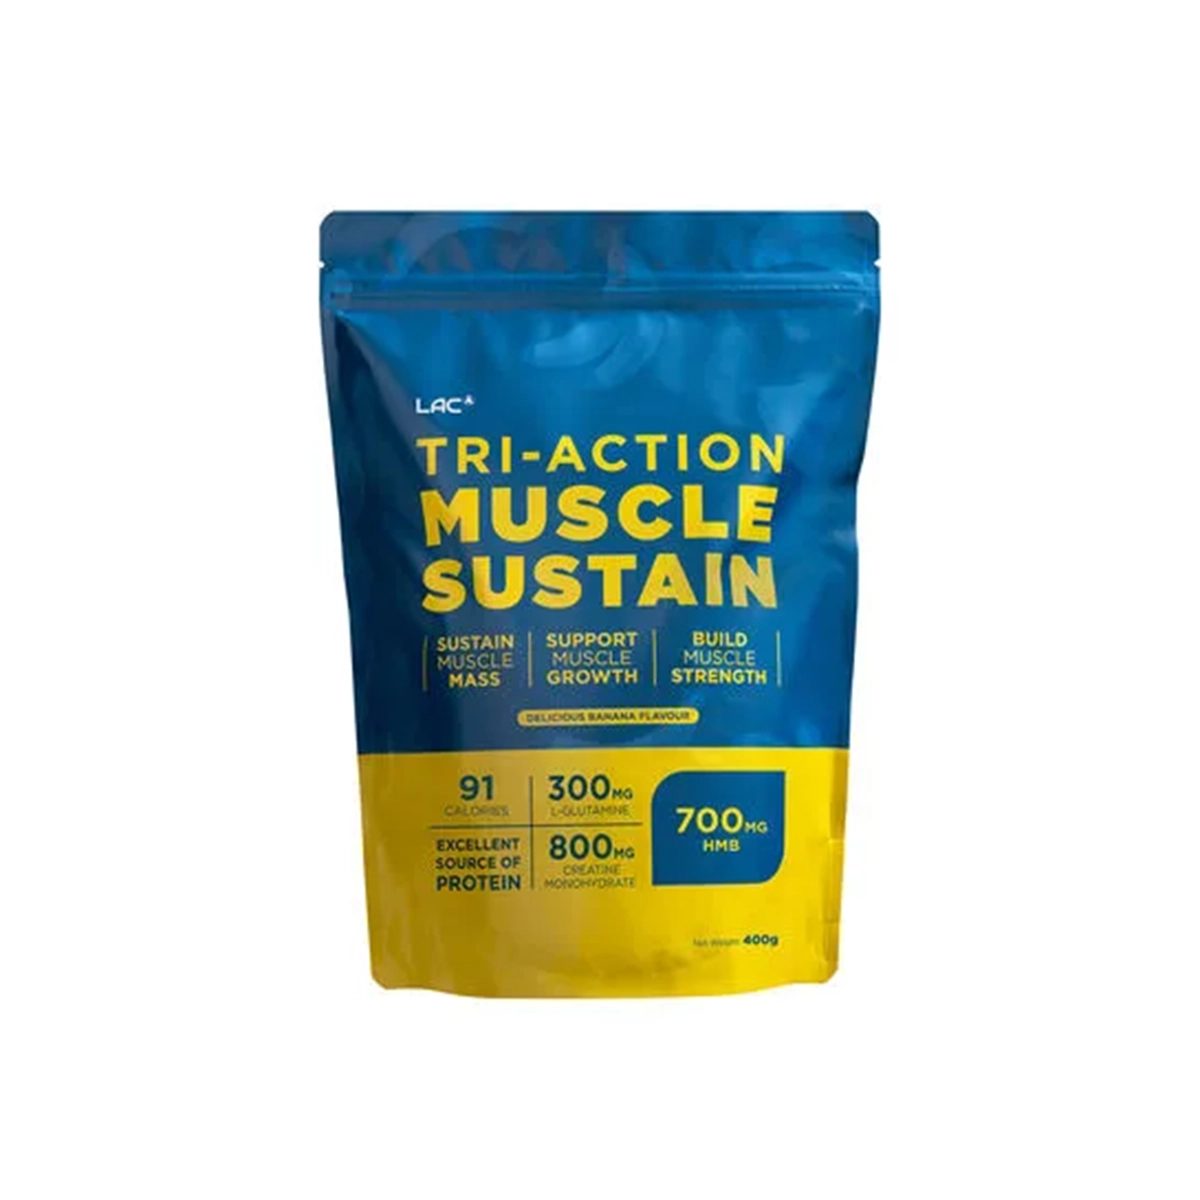 LAC PROTEIN Tri-Action Muscle Sustain - Muscle Mass Booster 400g